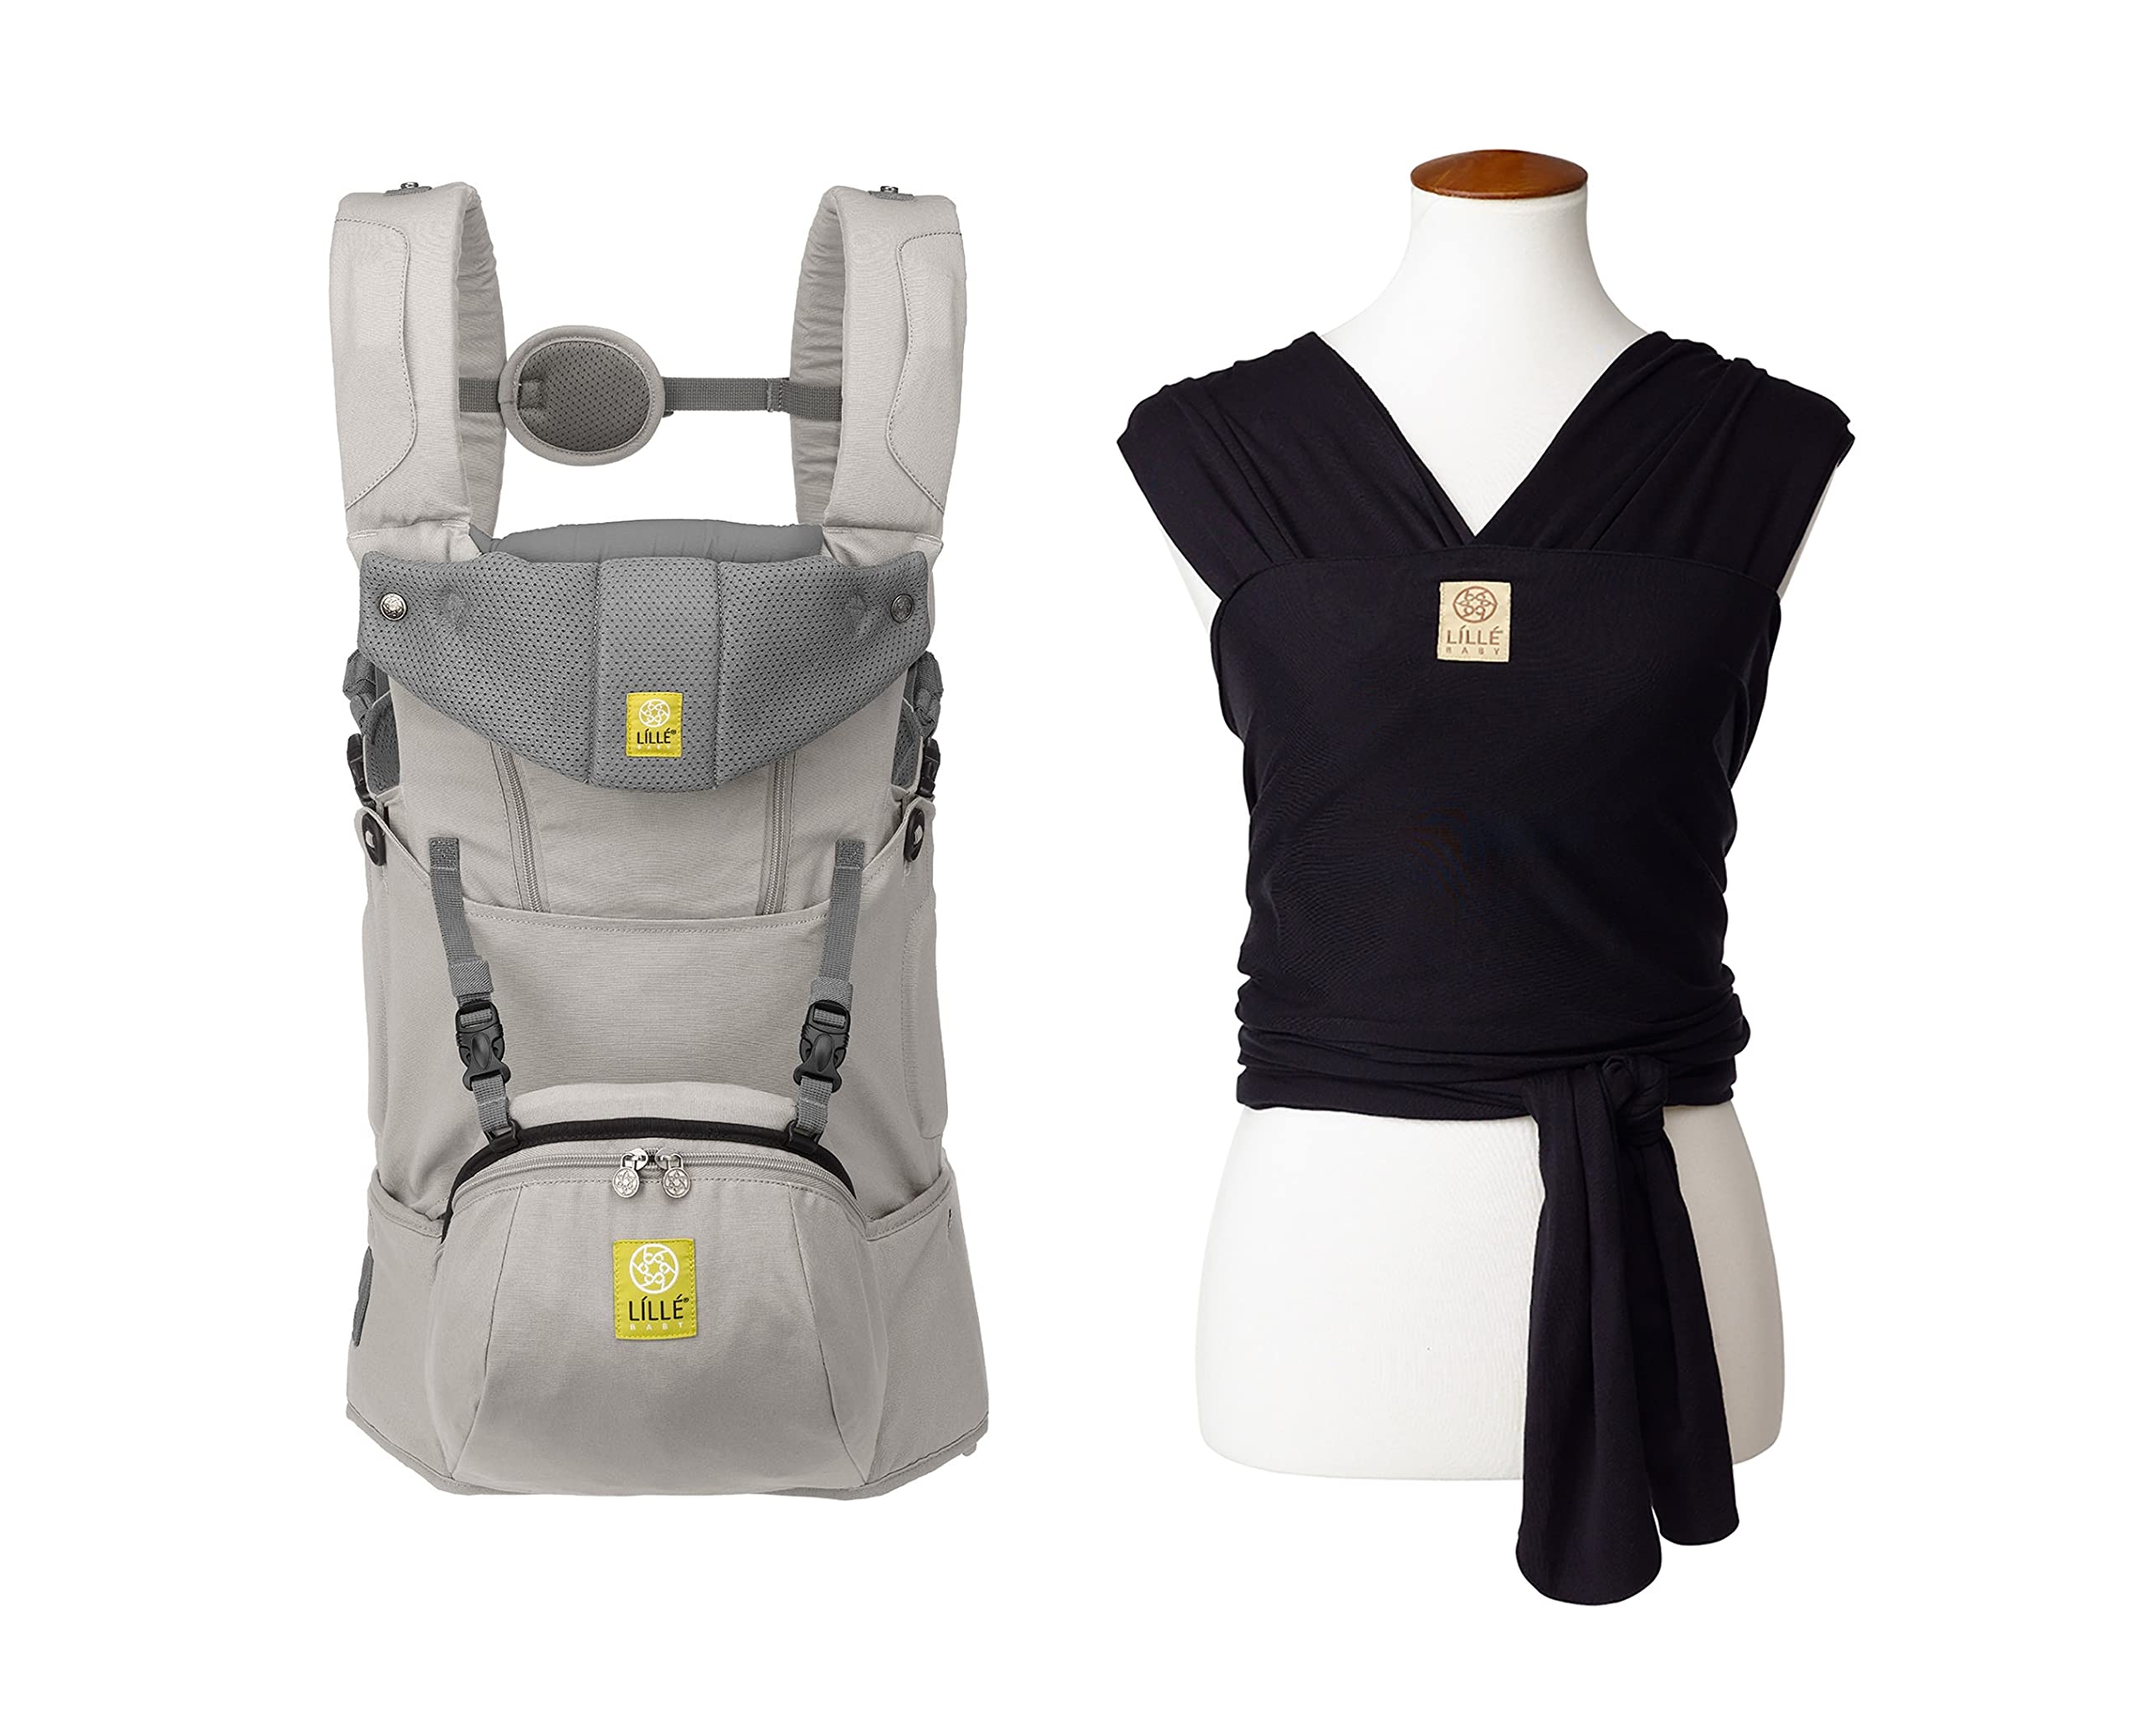 LÍLLÉbaby SeatMe Hip Seat All Seasons Ergonomic 6-in-1 Baby Carrier Newborn to Toddler - with Lumbar Support and Dragonfly Wrap Ergonomic Baby Wrap Carrier Bundle for Newborns & Infants